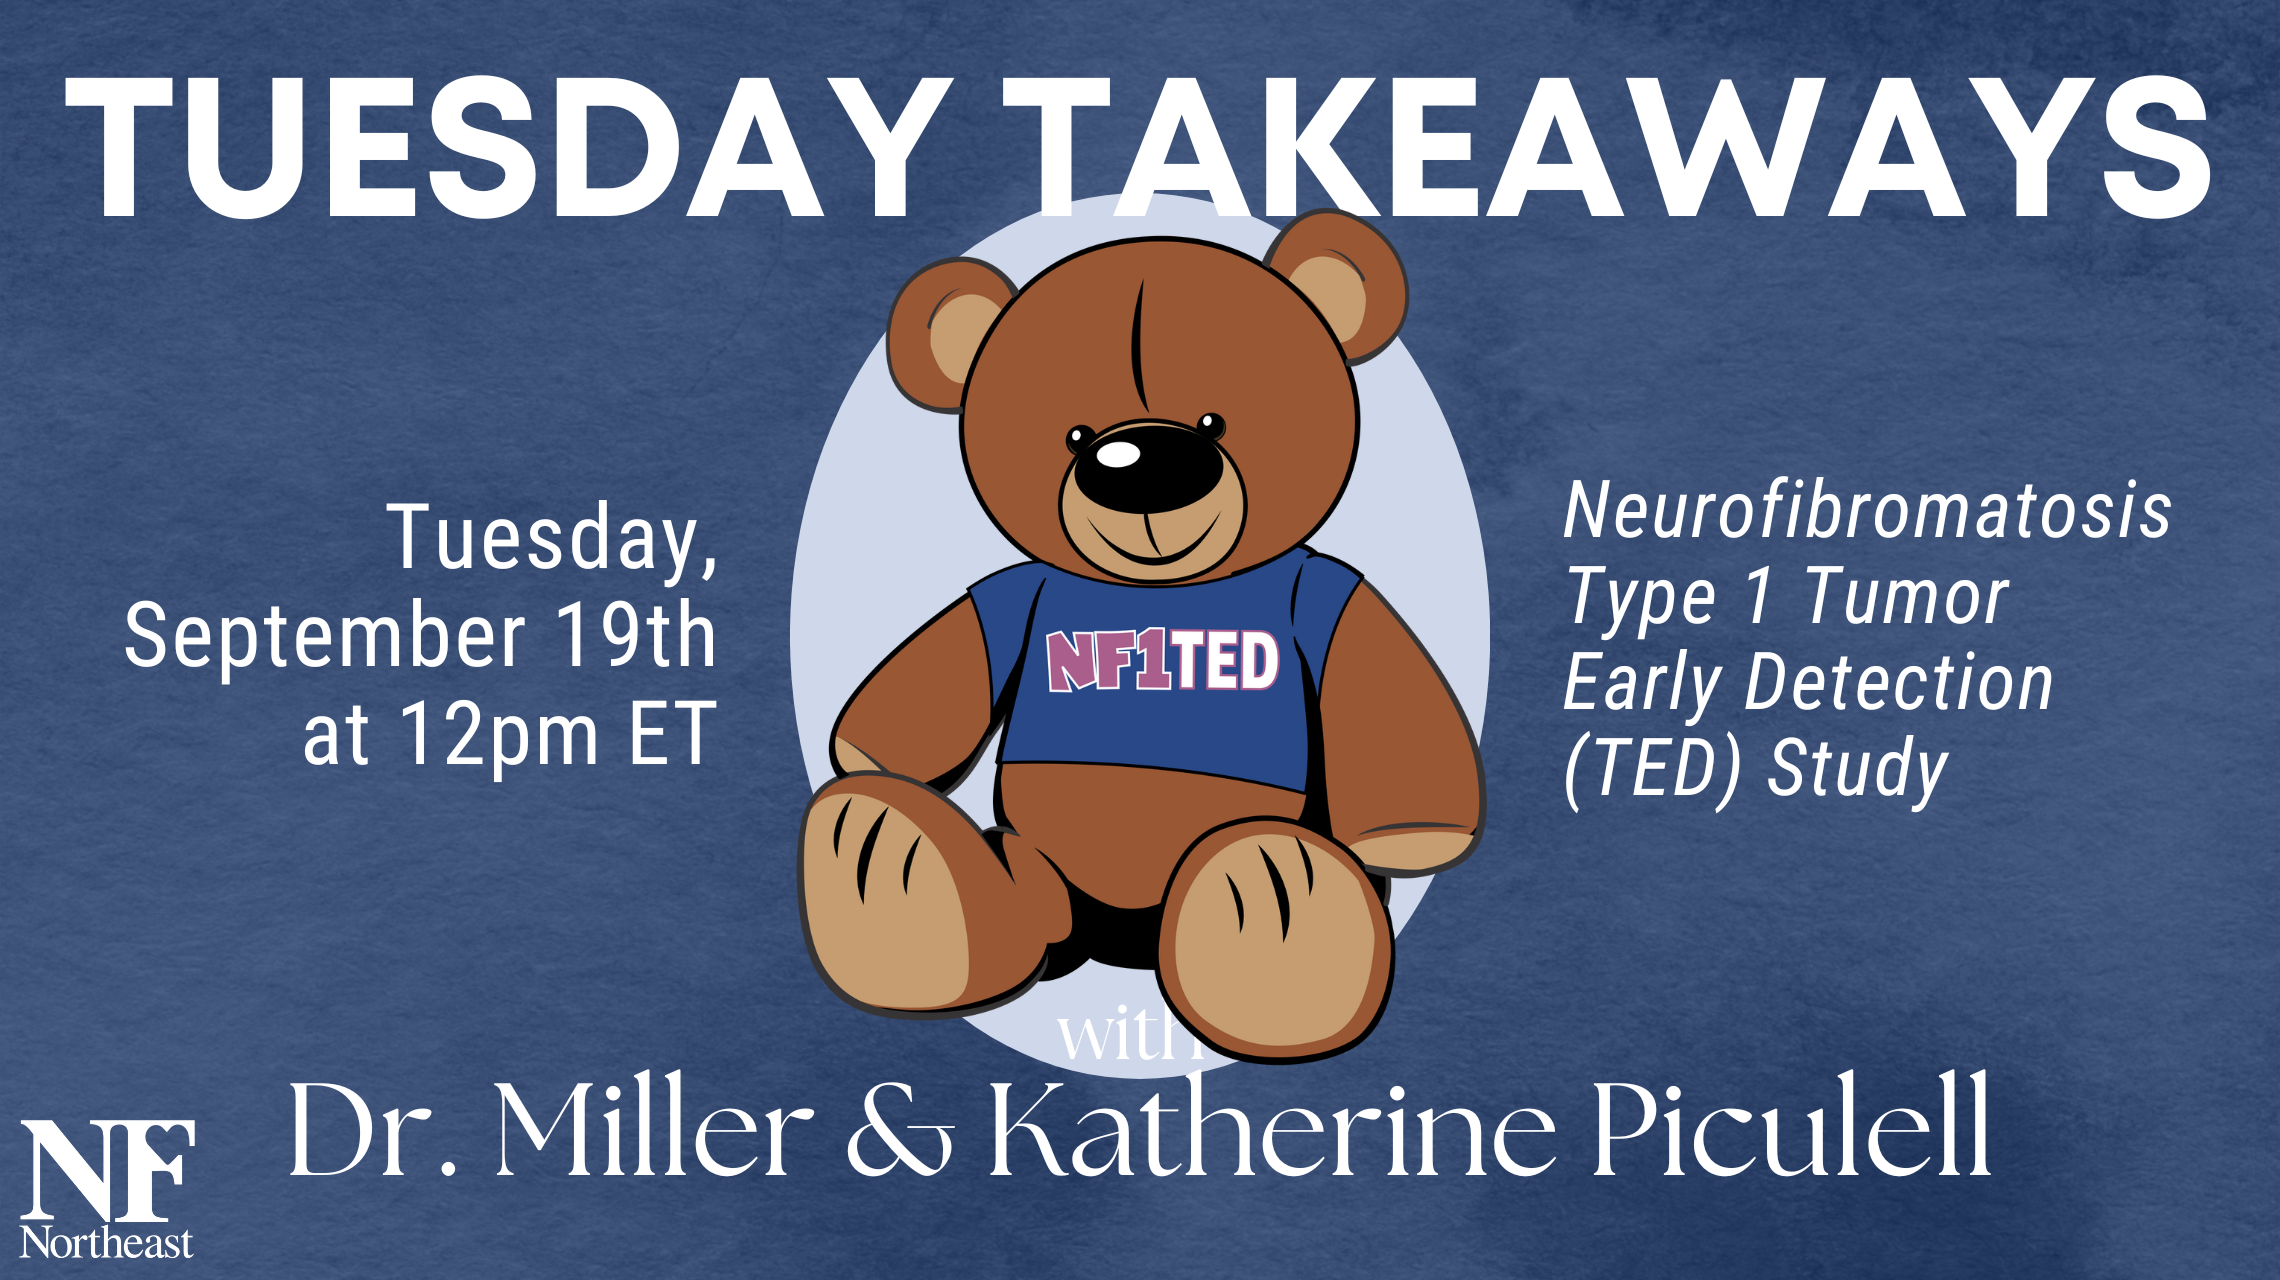 Tuesday Takeaways Sept graphic with cartoon image of teddy bear